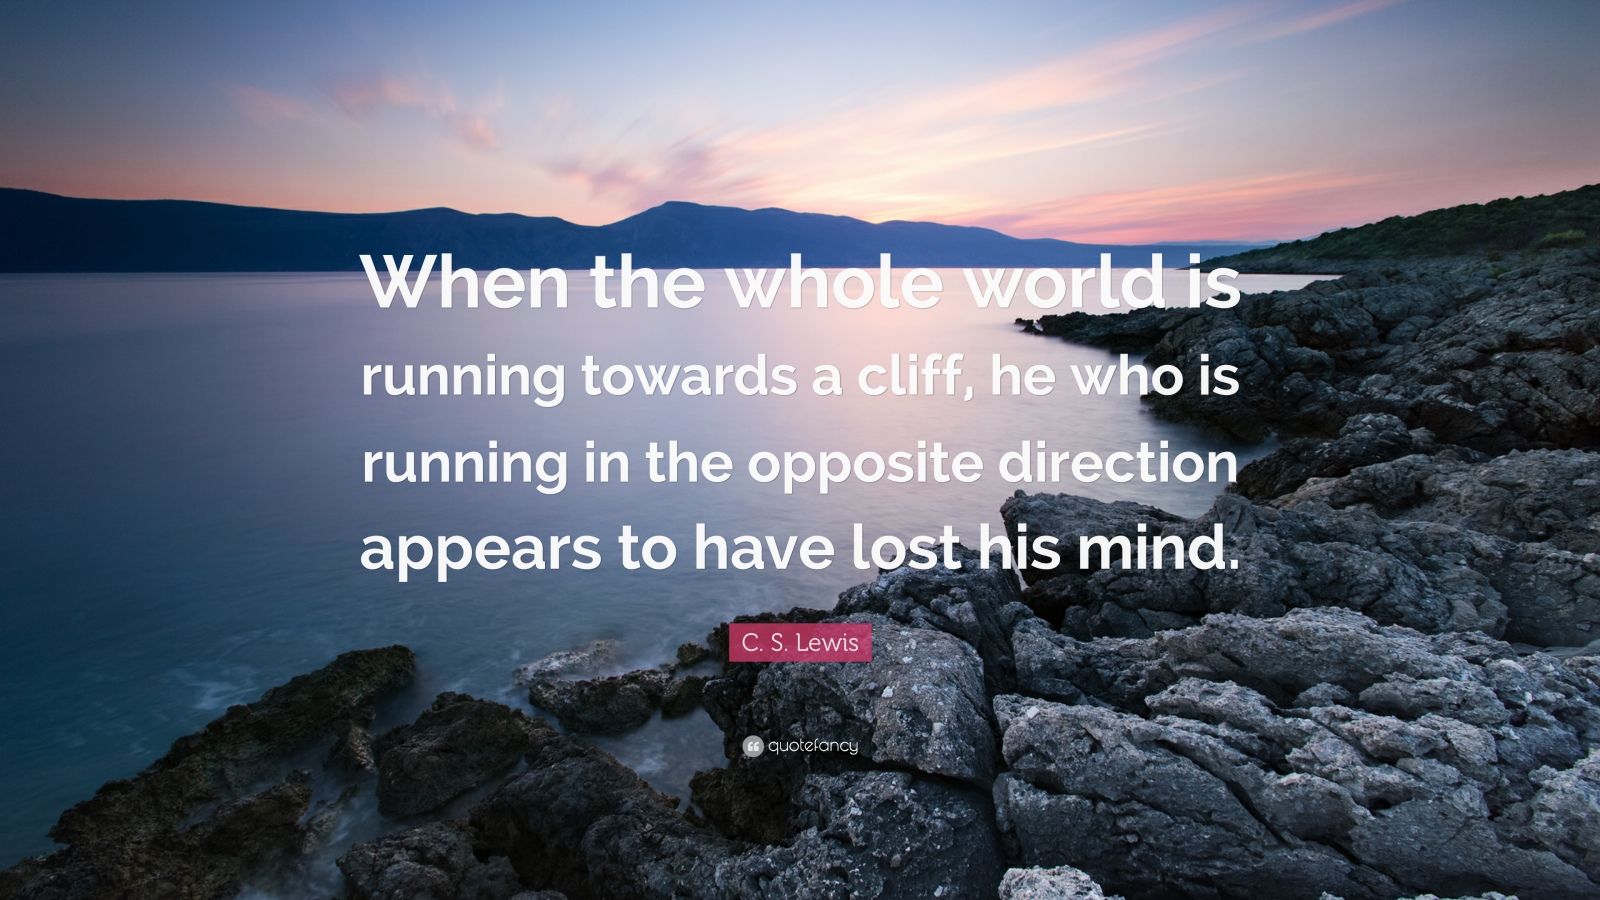 C. S. Lewis Quote: “When the whole world is running towards a cliff, he